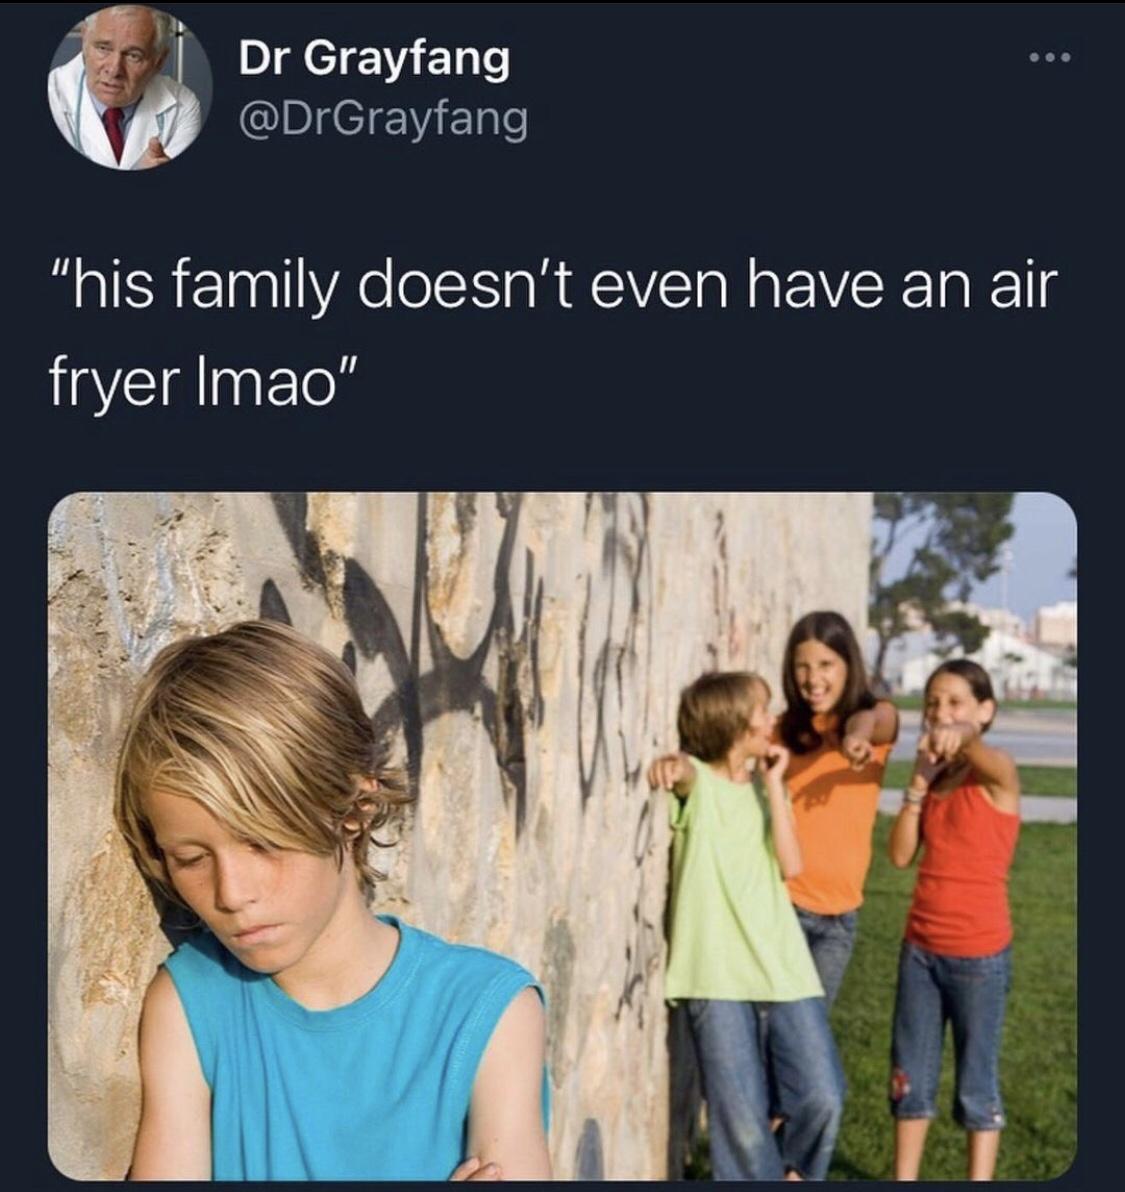 man vs society bullying - .. Dr Grayfang "his family doesn't even have an air fryer Imao"